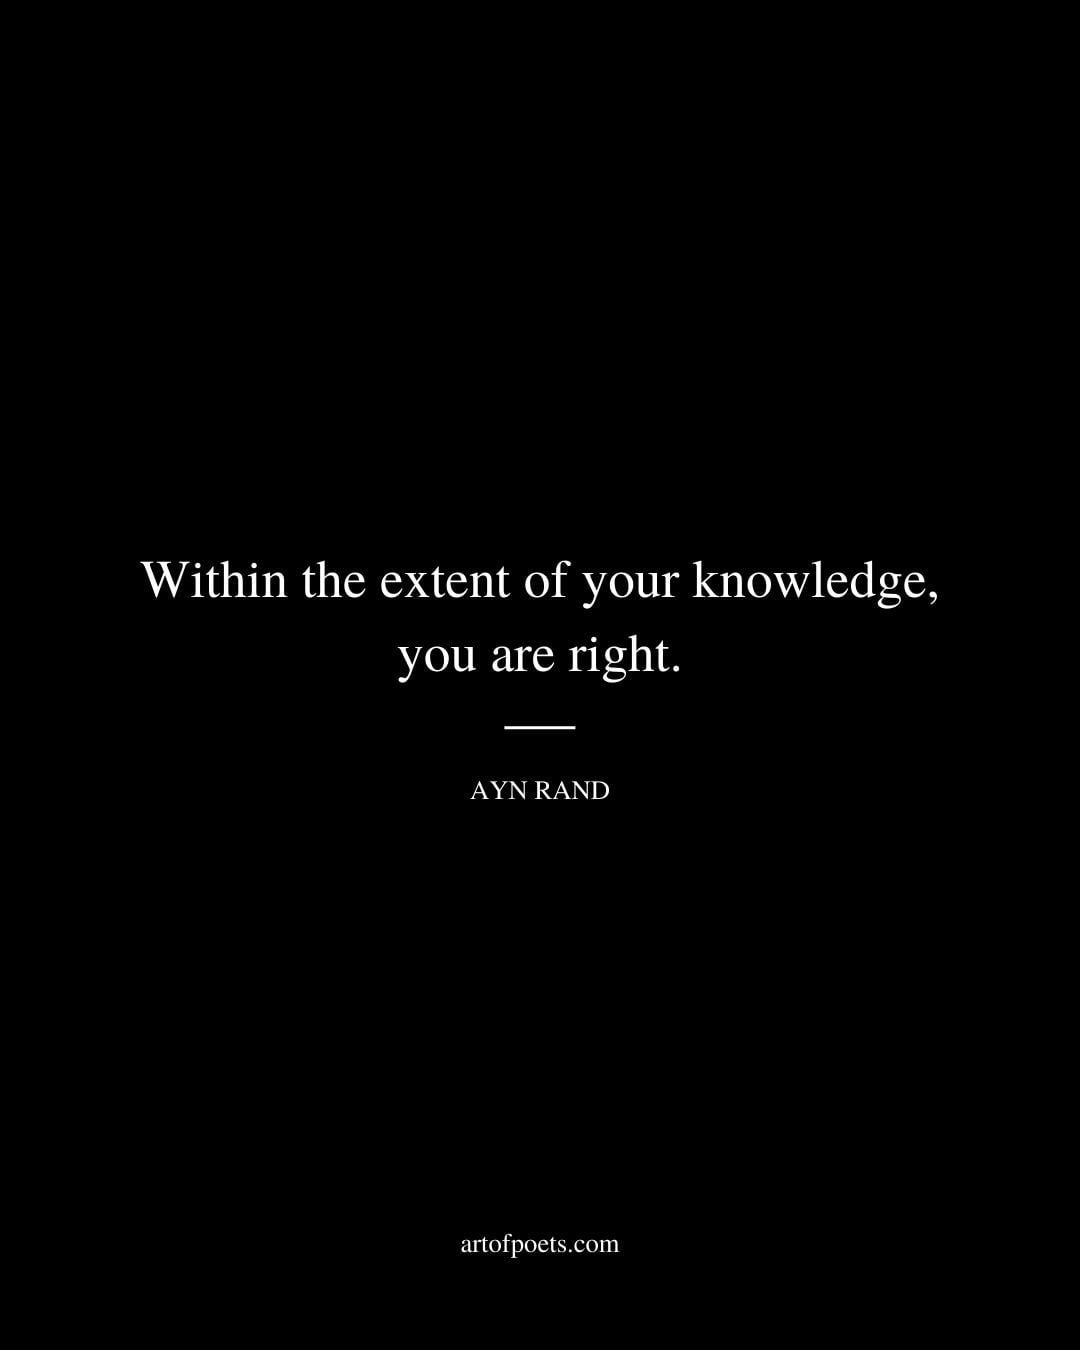 Within the extent of your knowledge you are right